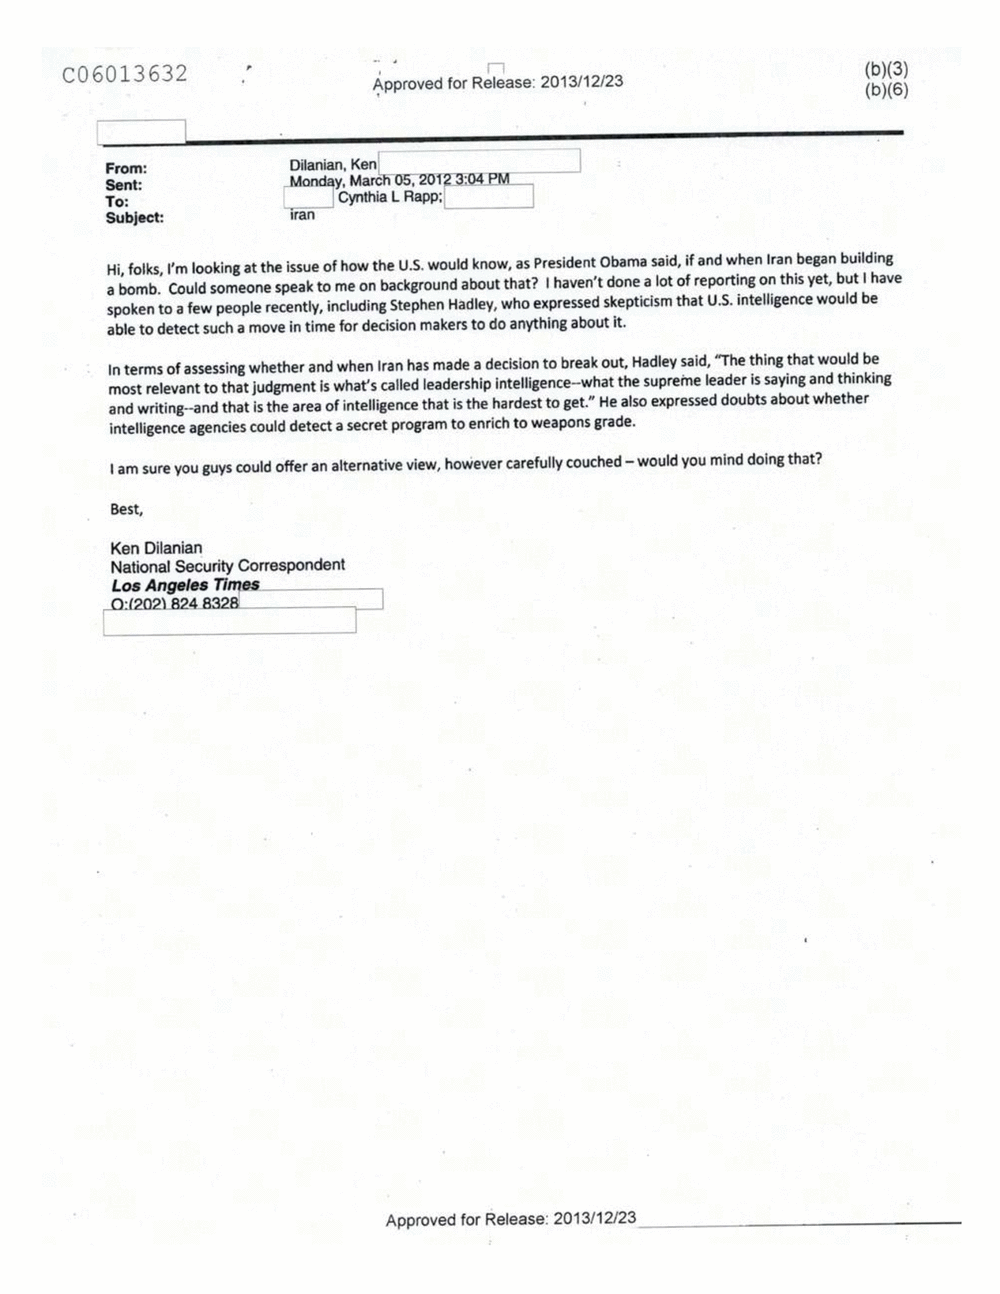 Page 469 from Email Correspondence Between Reporters and CIA Flacks